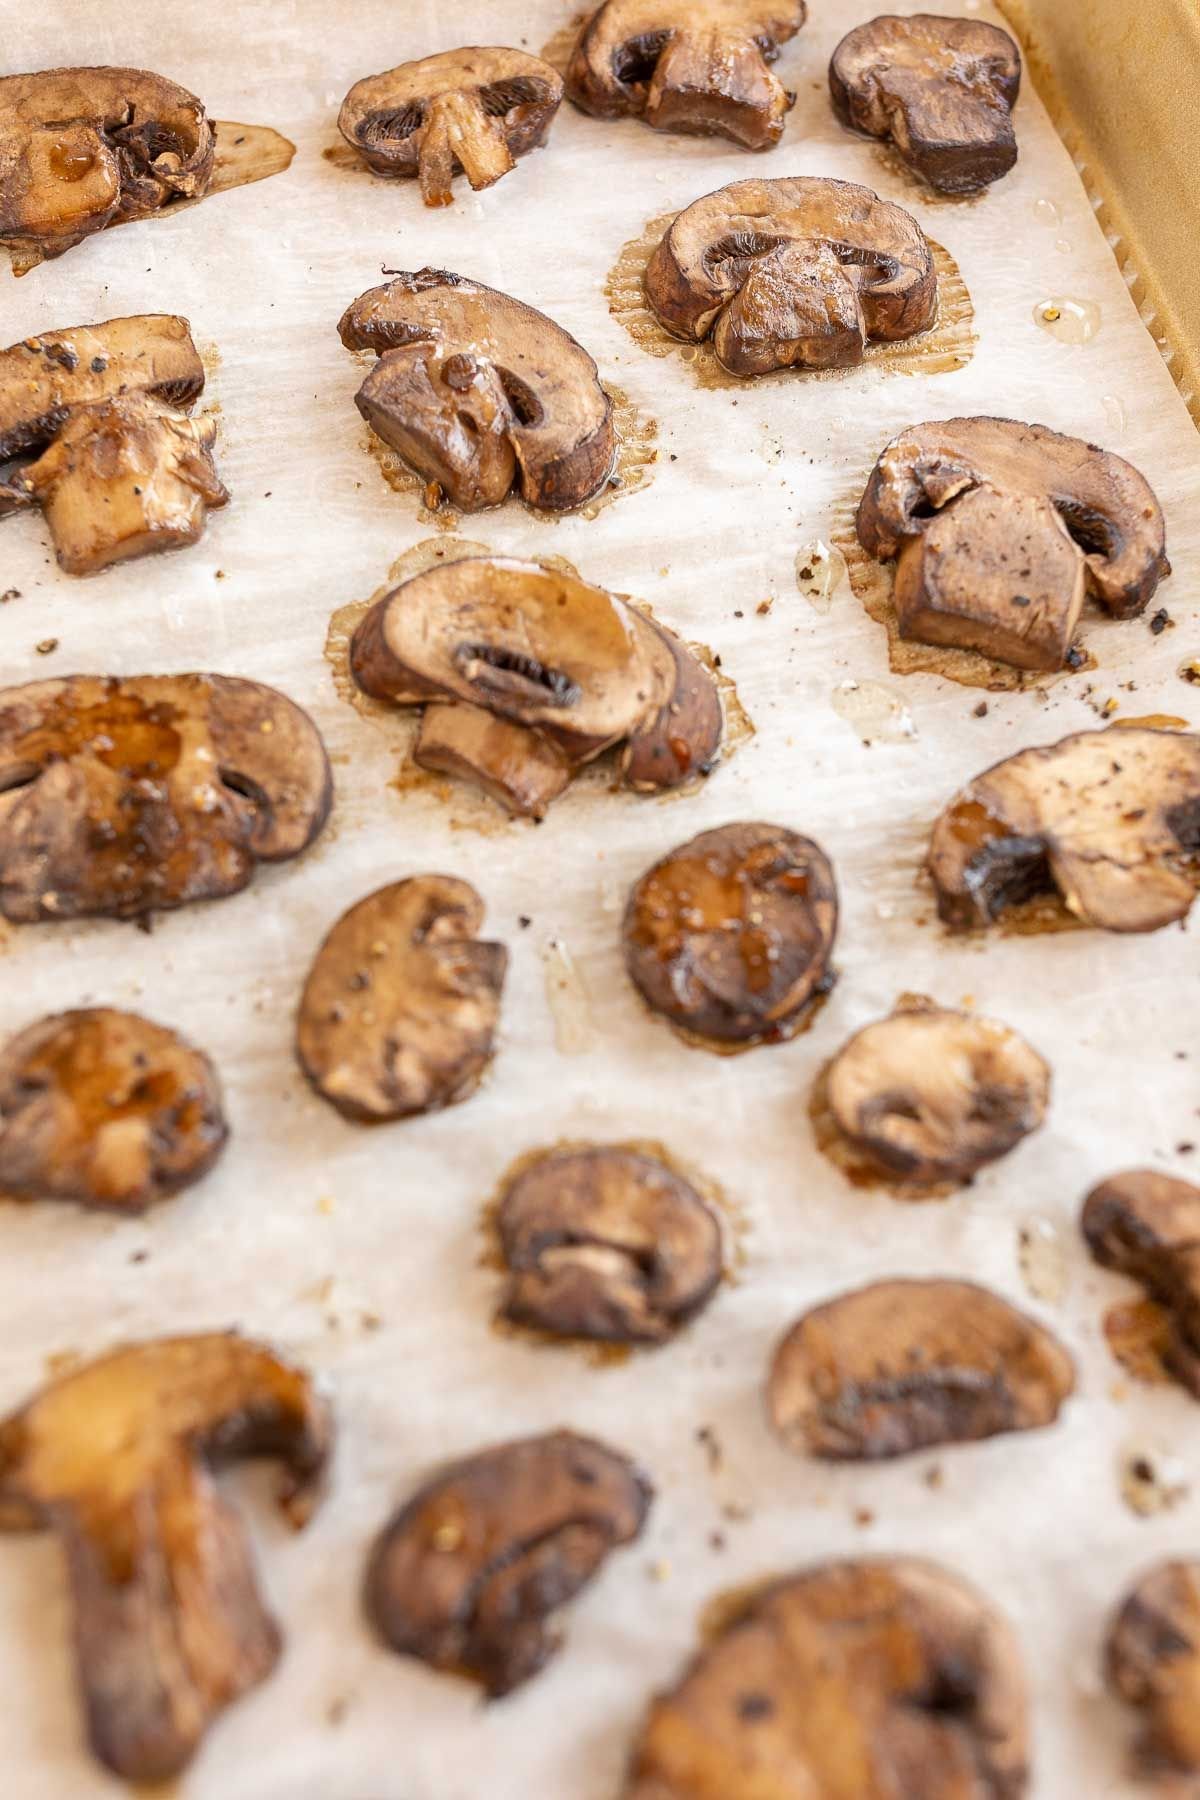 Roasted mushrooms on a sheet pan lined with parchment paper